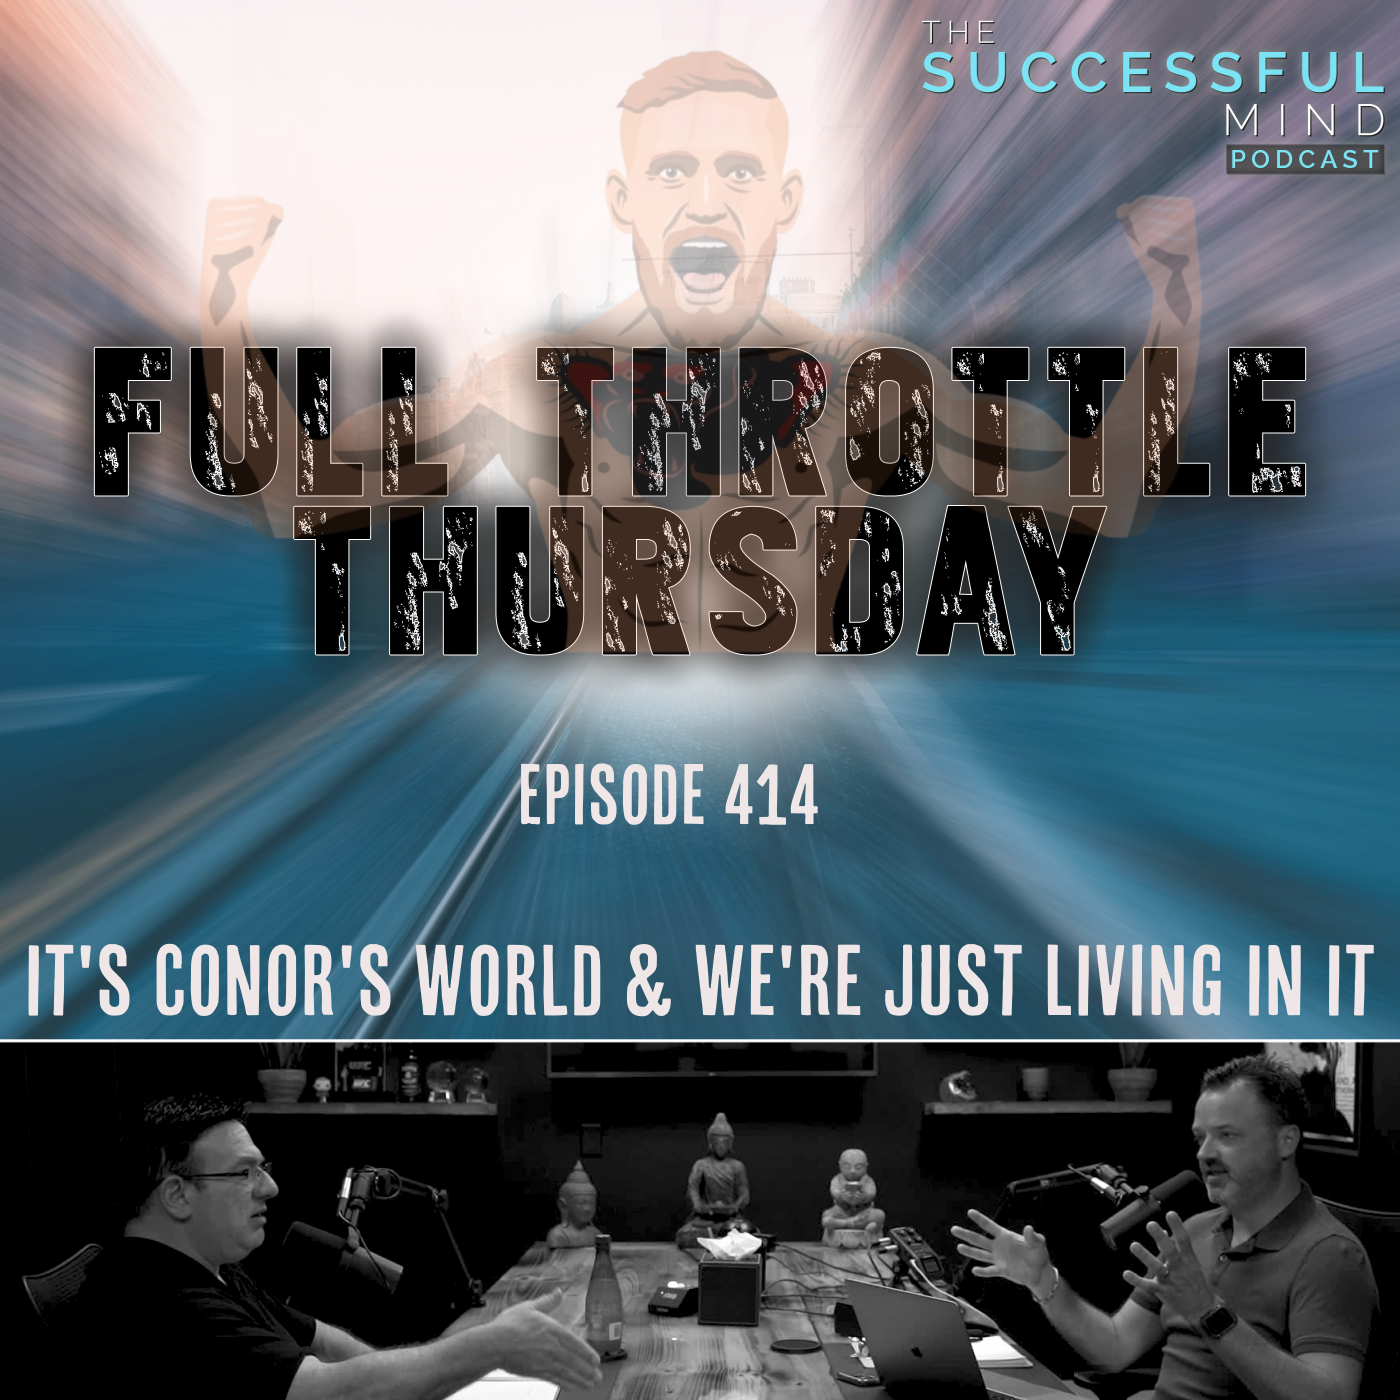 The Successful Mind Podcast - Full Throttle Thursday - It's Conor's World